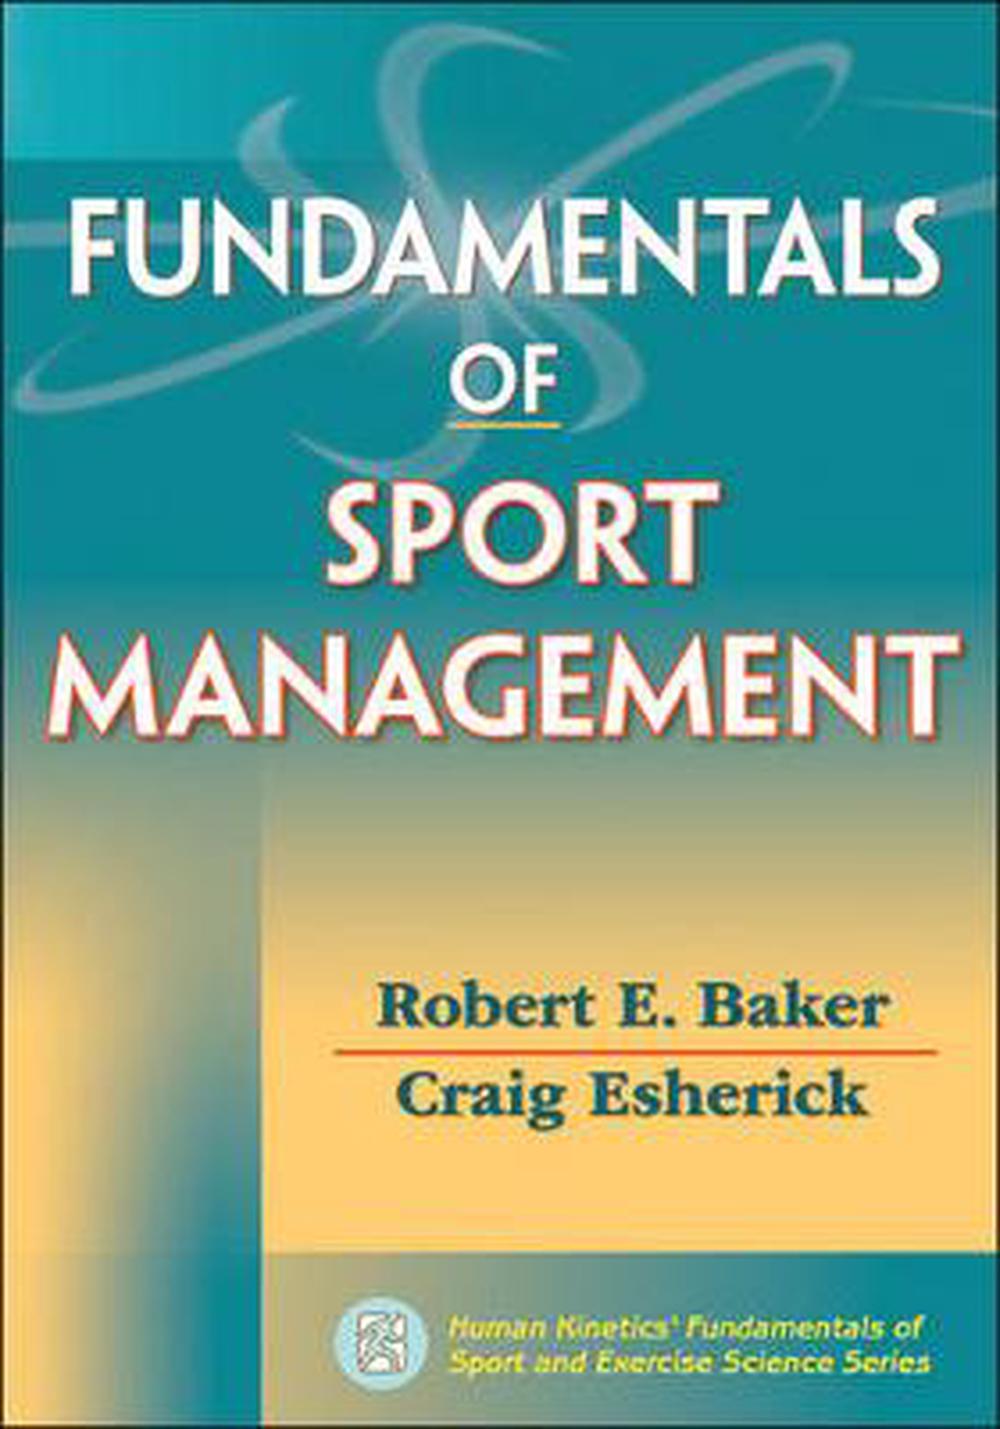 research about sports management